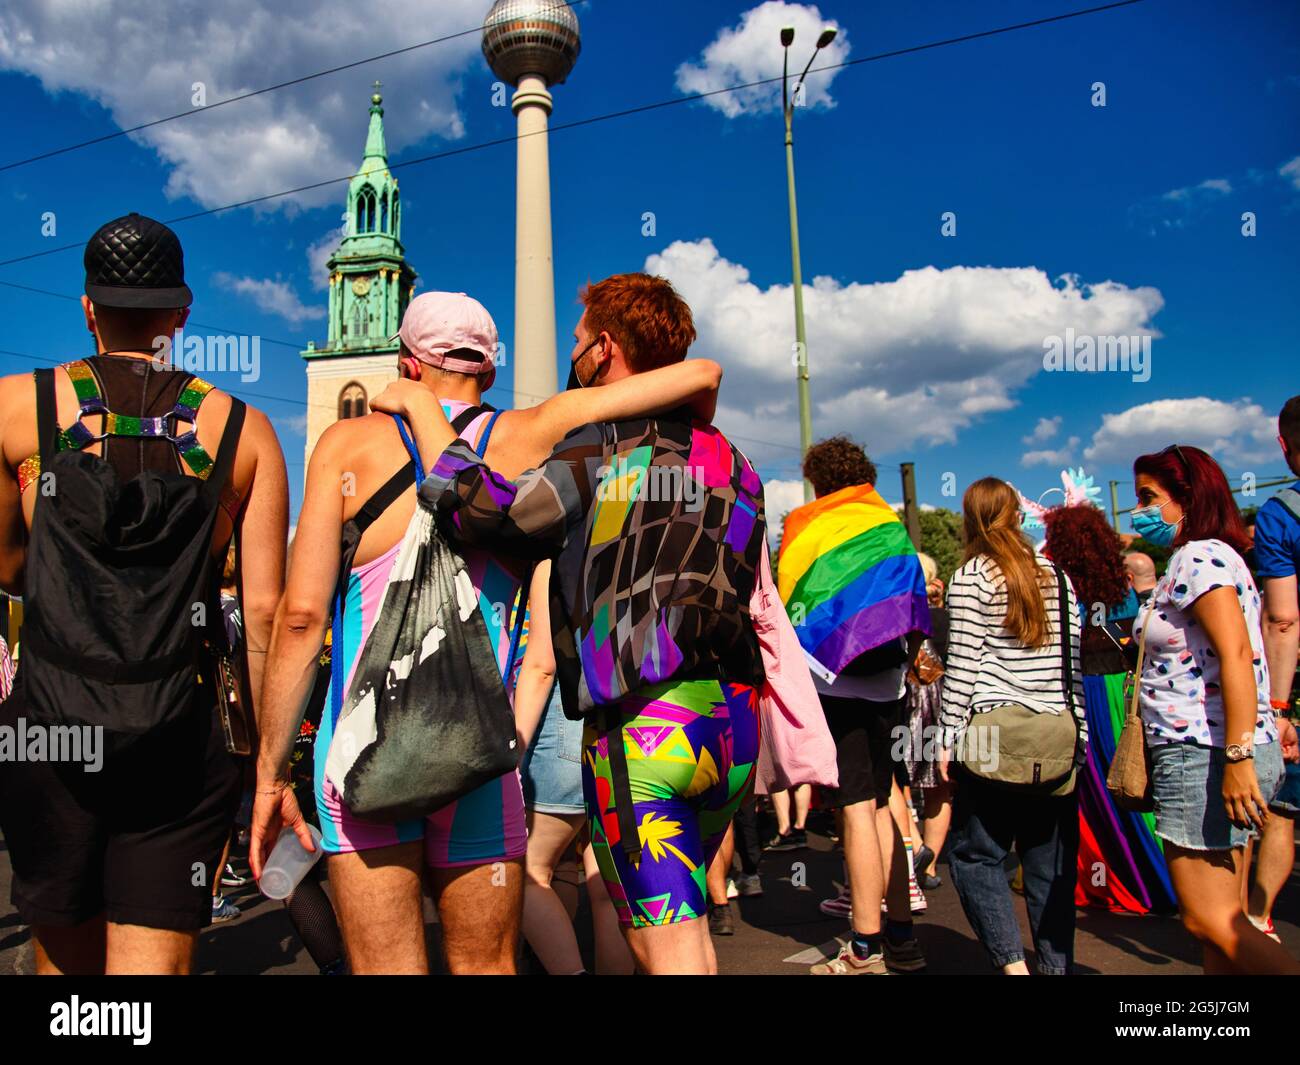 Berlin, Germany - June 26, 2021 - People at Christopher Street Day (CSD) with the Berlin TV tower in the background Stock Photo